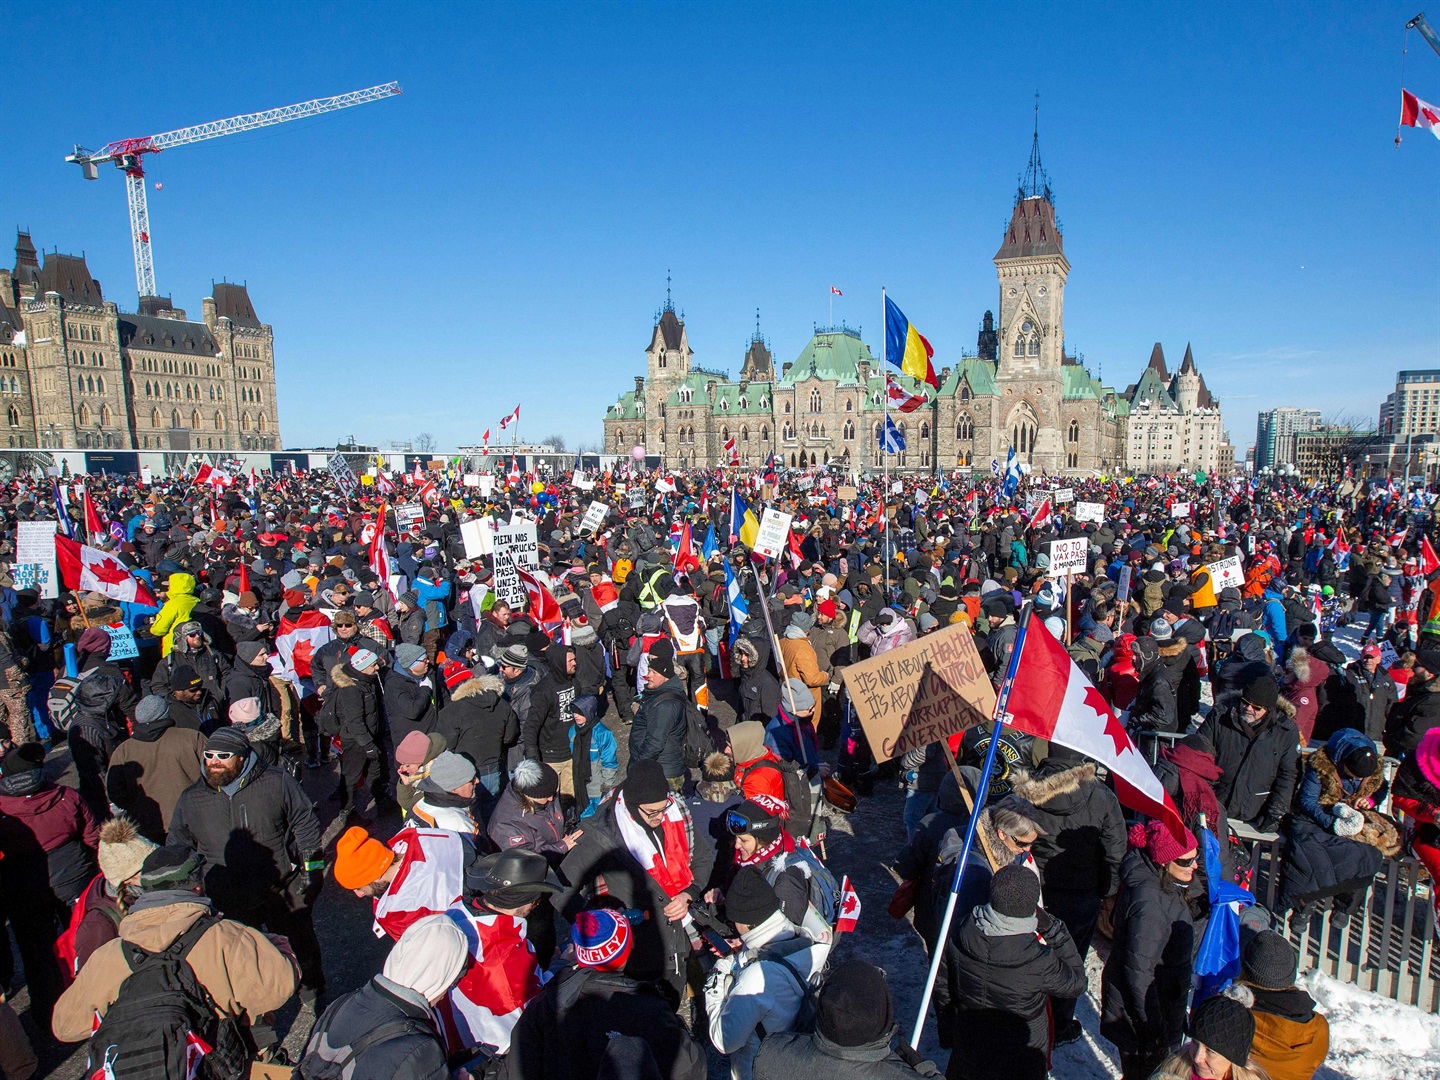 Supporters arrive at Parliament Hill for the Freedom Truck Convoy to protest against Covid-19 vaccine mandates and restrictions in Ottawa, Canada, on January 29, 2022. Lars Hagberg/AFP/Getty Images